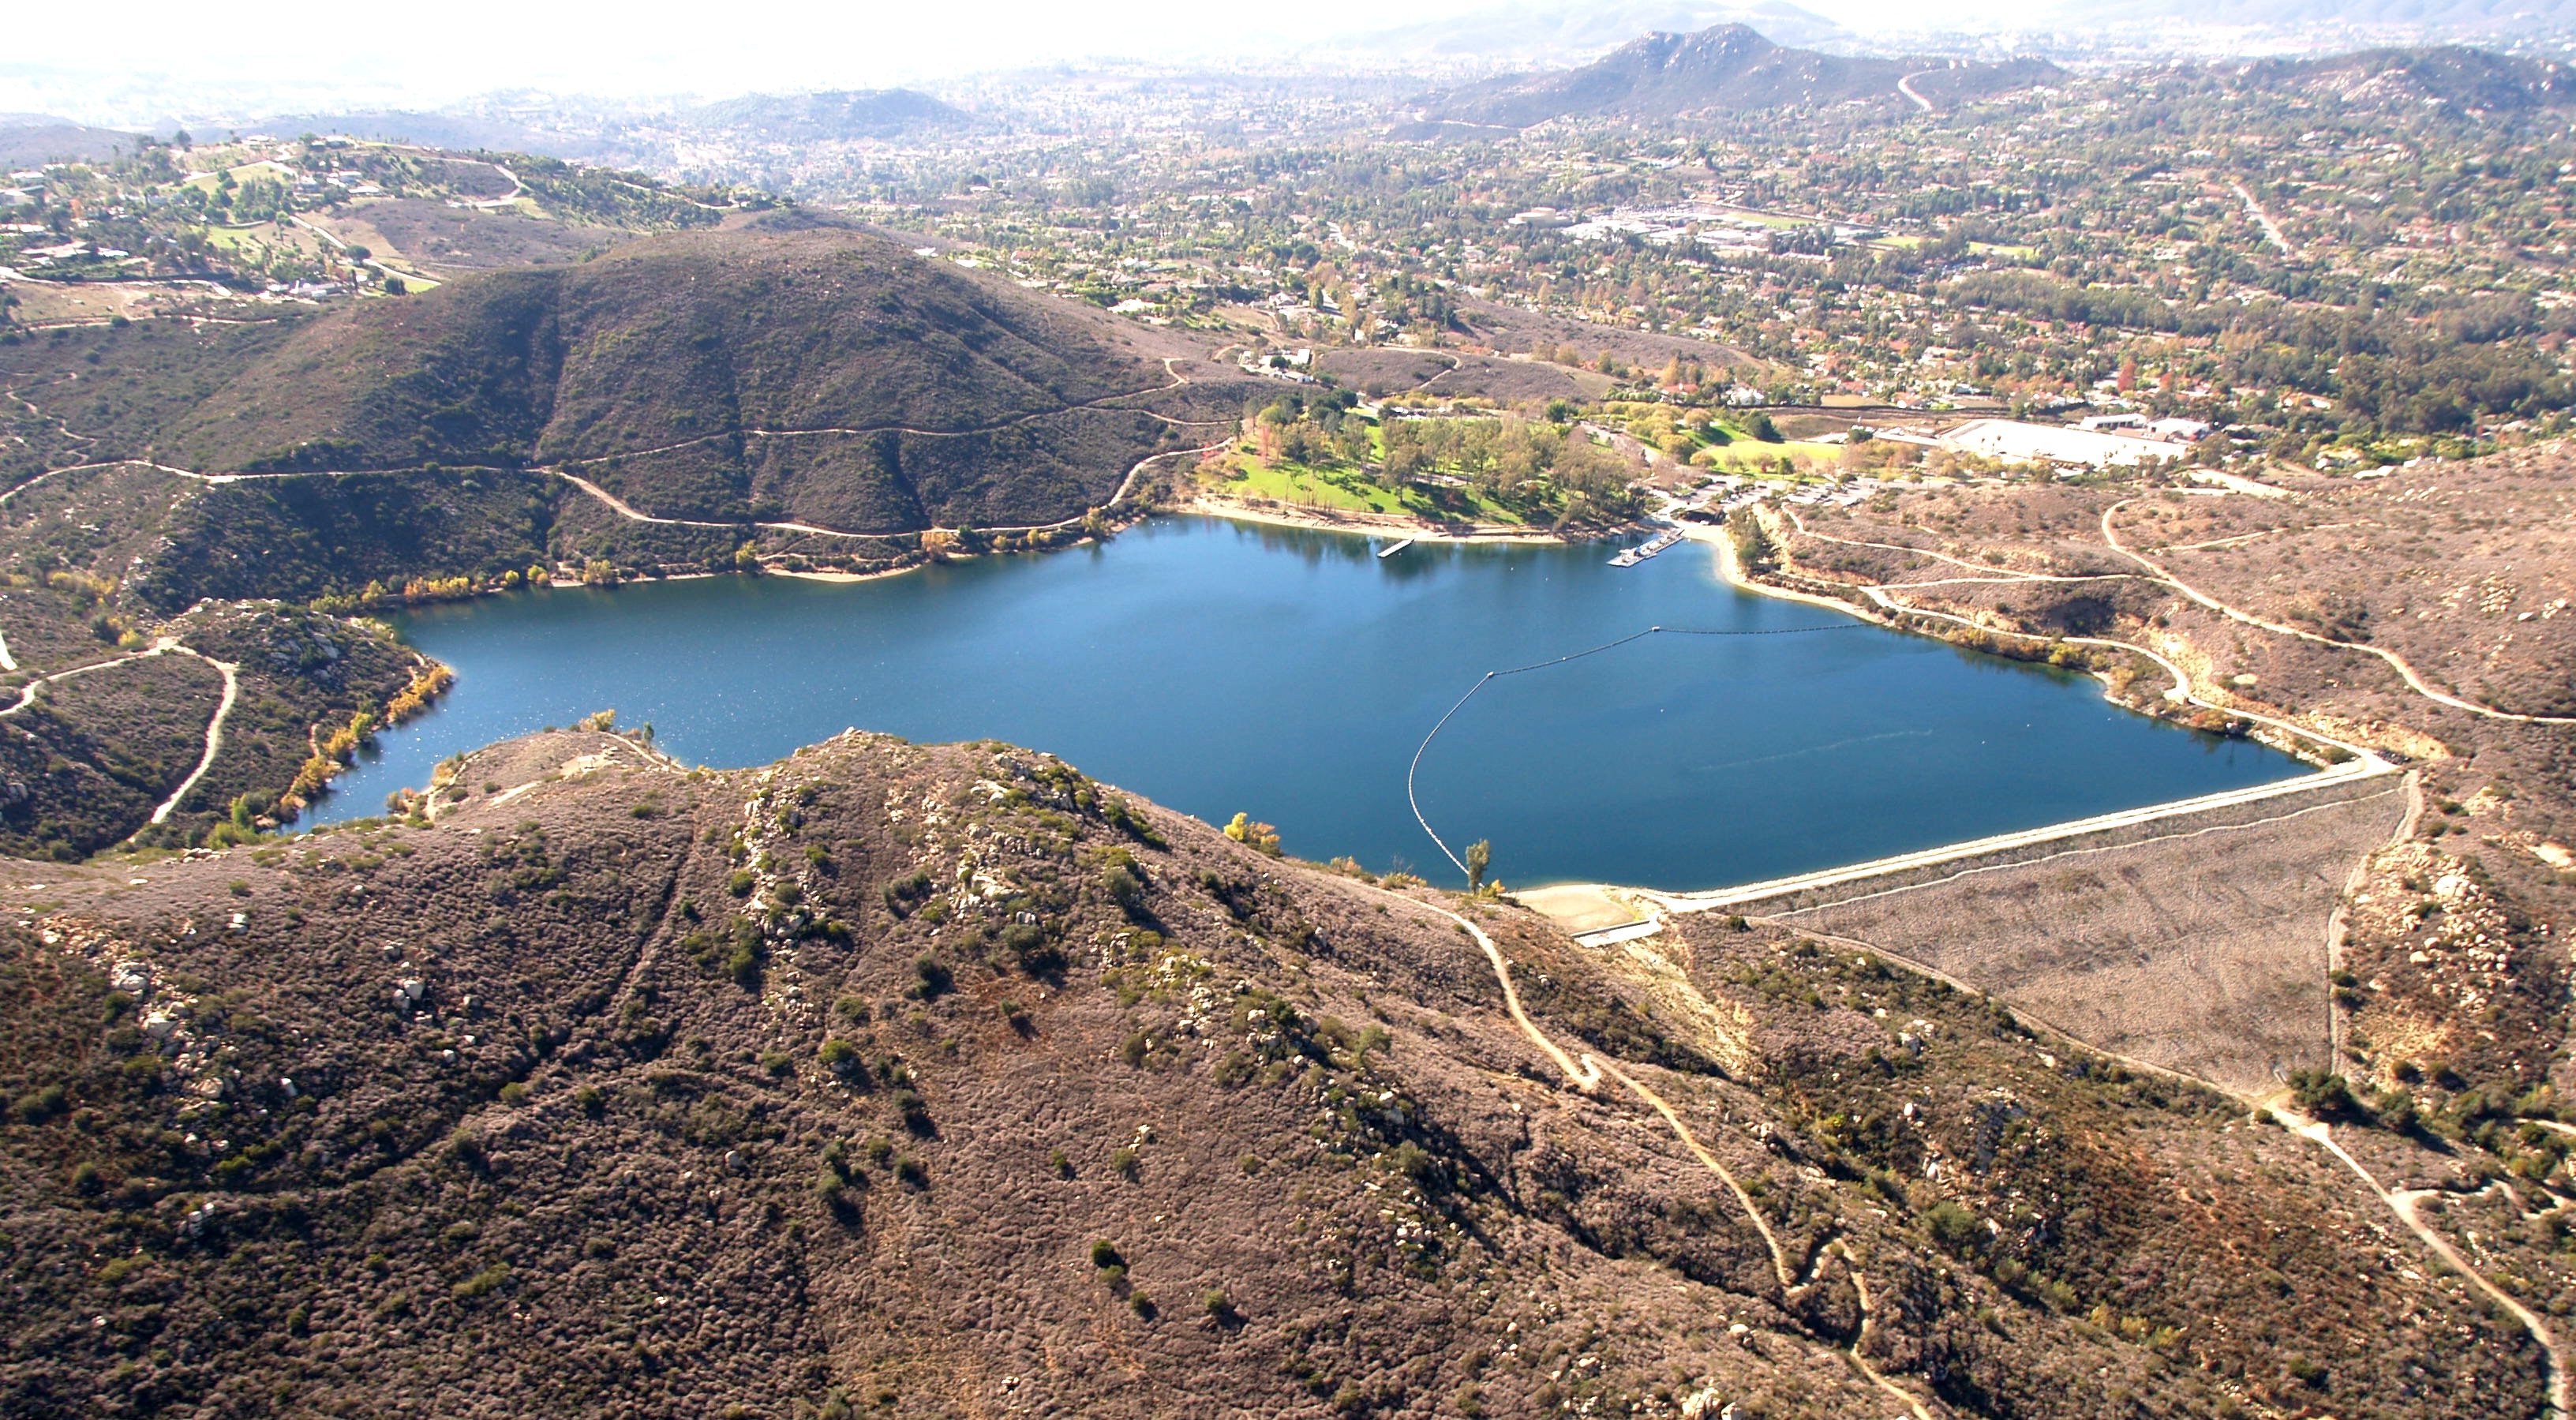 Photo of Lake Poway in Poway San Diego CA 92064 by Phil Konstantin from Wikimedia.org